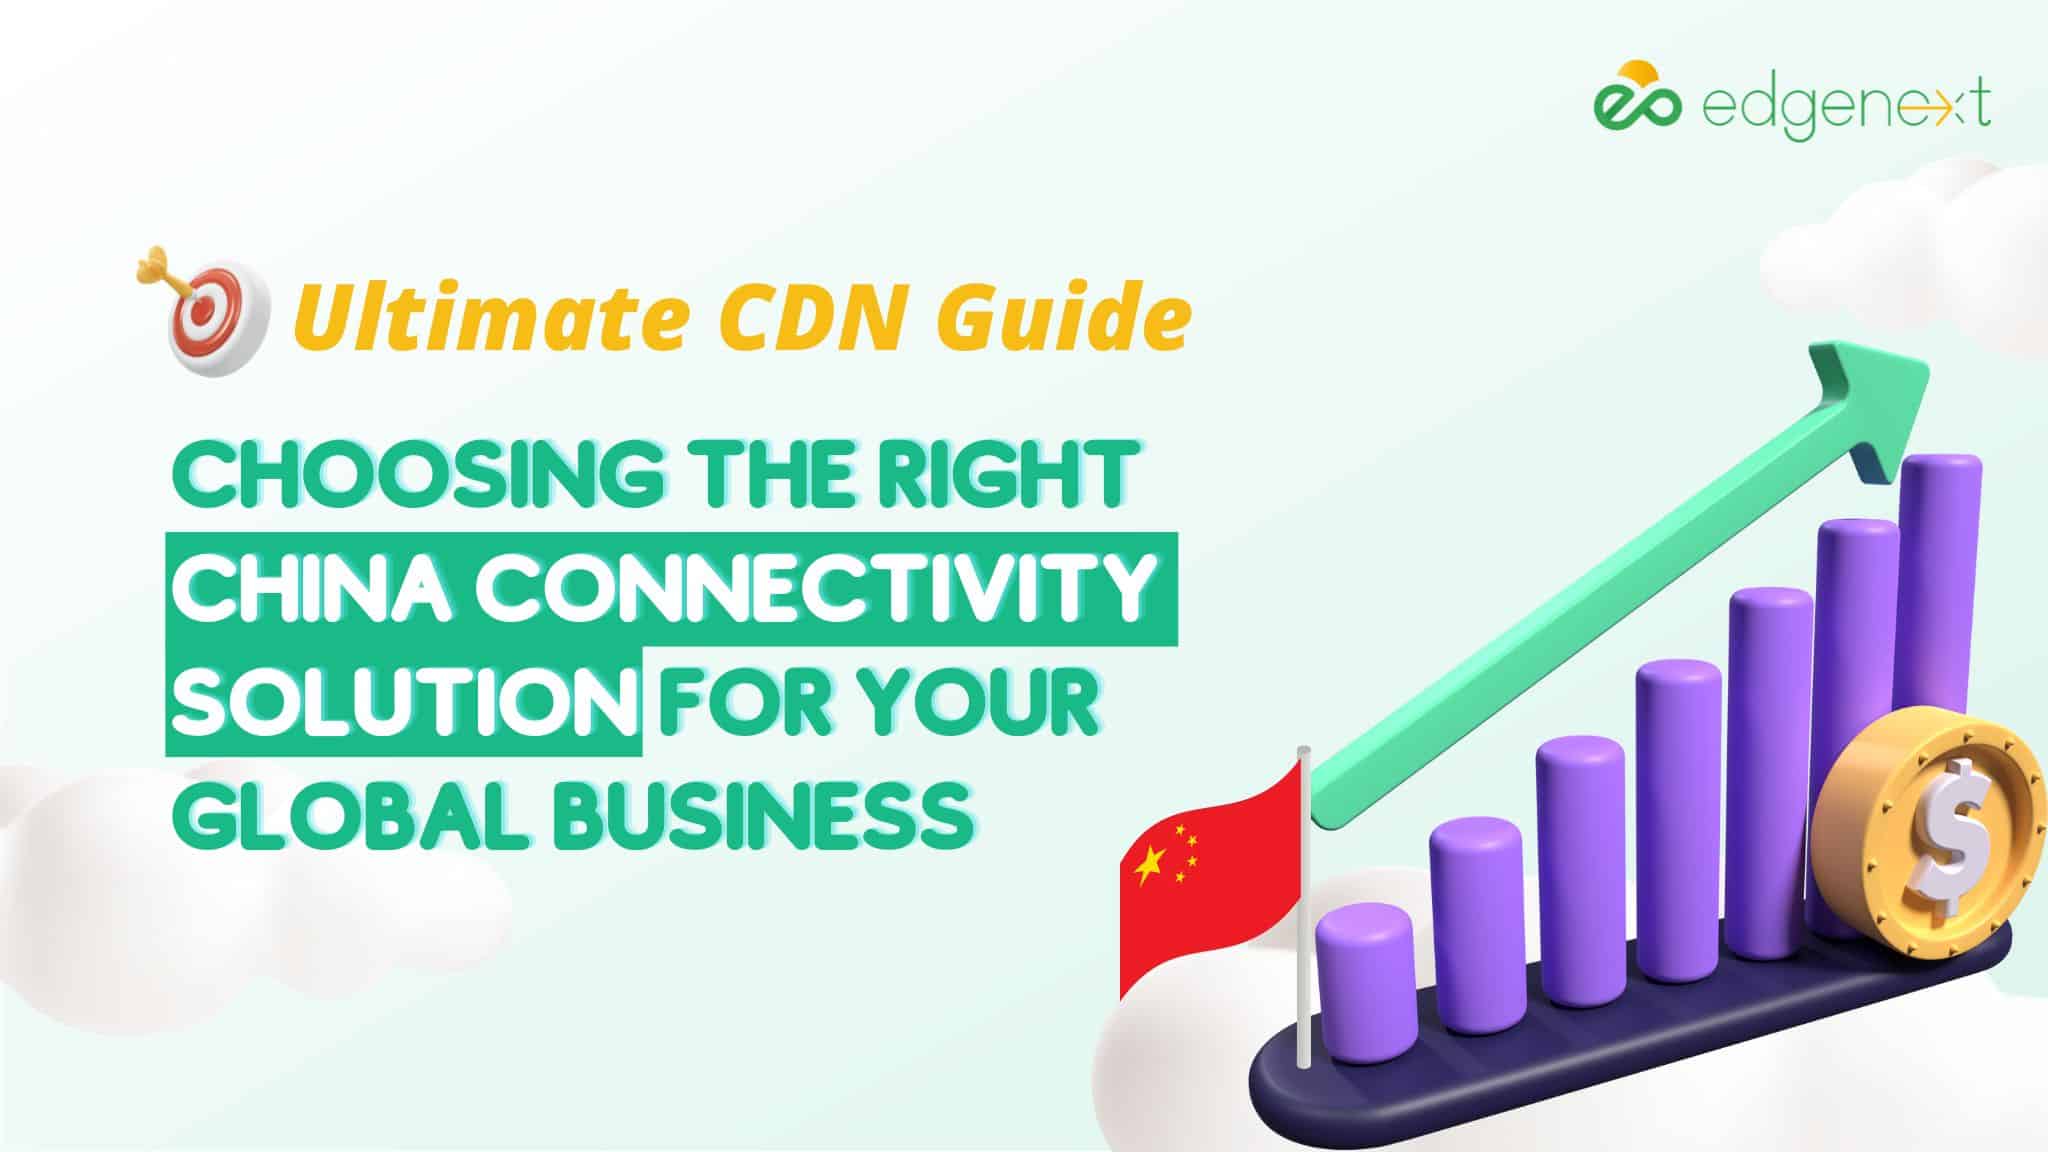 Choosing the Right China Connectivity Solution for Your Global Business